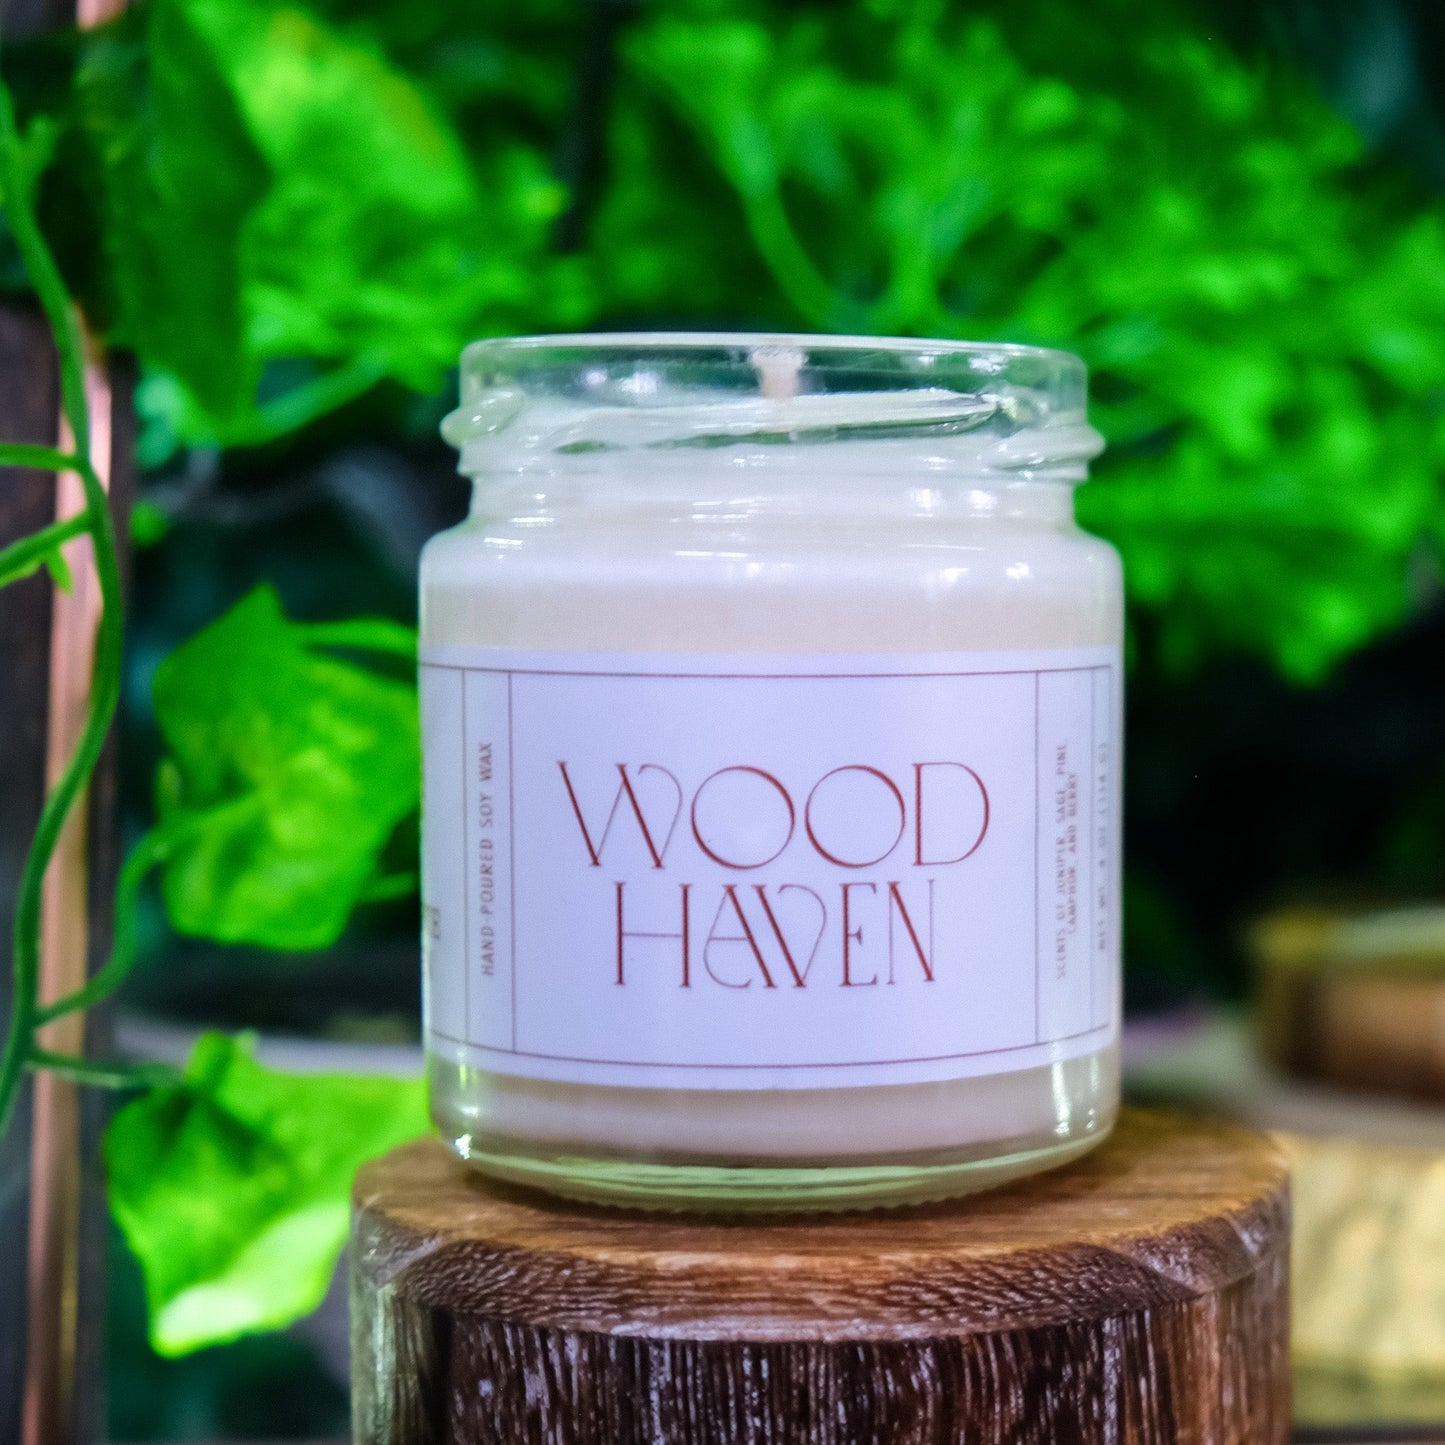 Wood Haven, Juniper and Sage Soy Candle, 4 oz